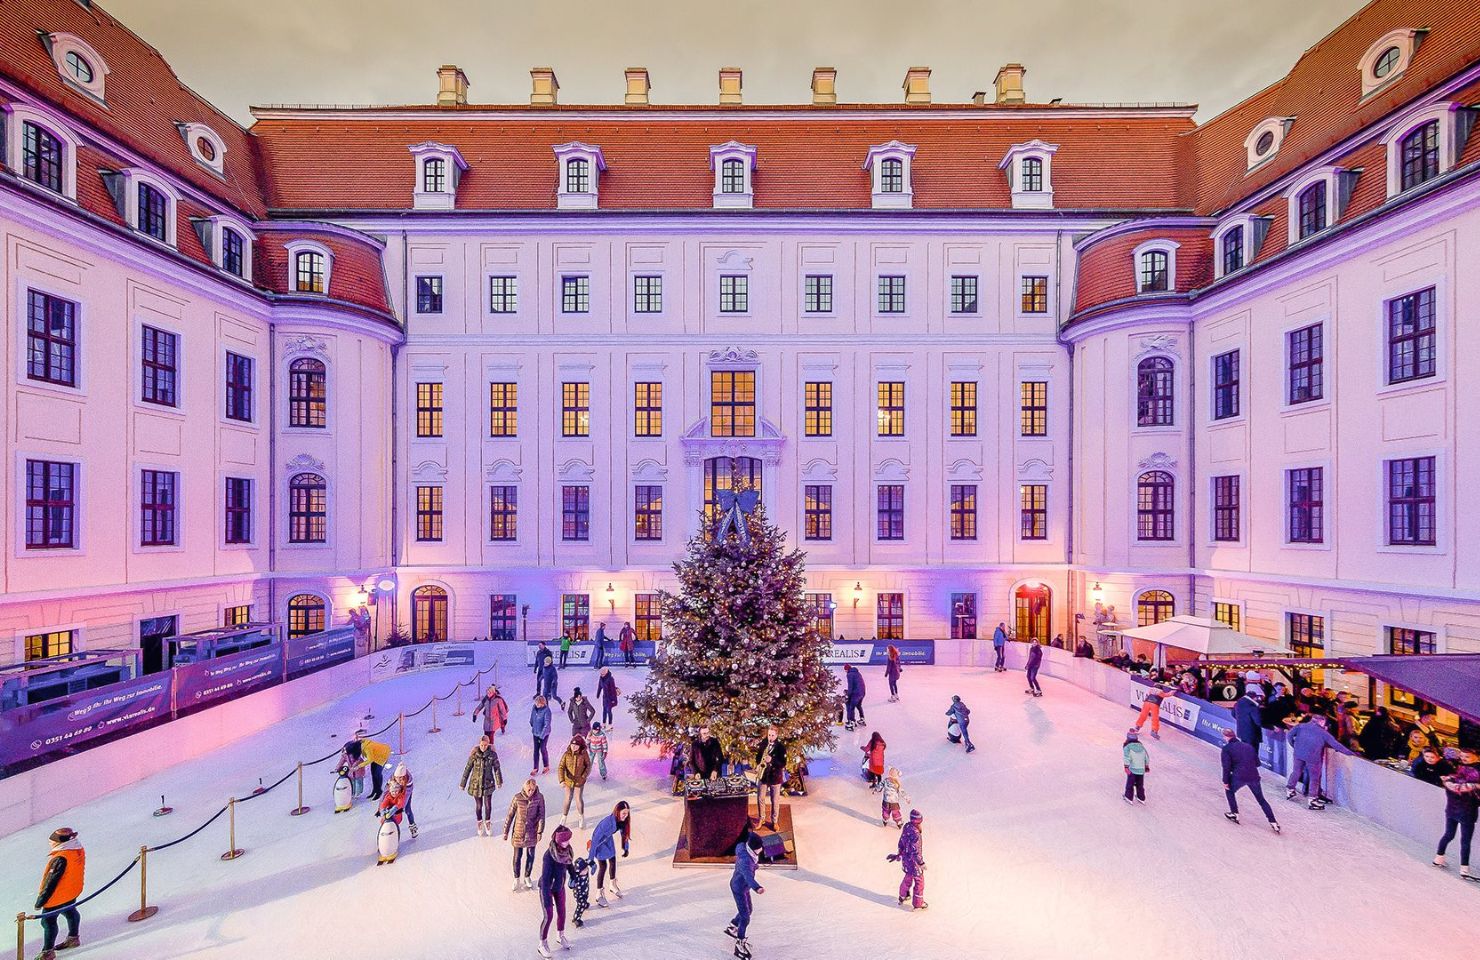 Ice skating rink at the Taschenbergpalais Hotel in Dresden